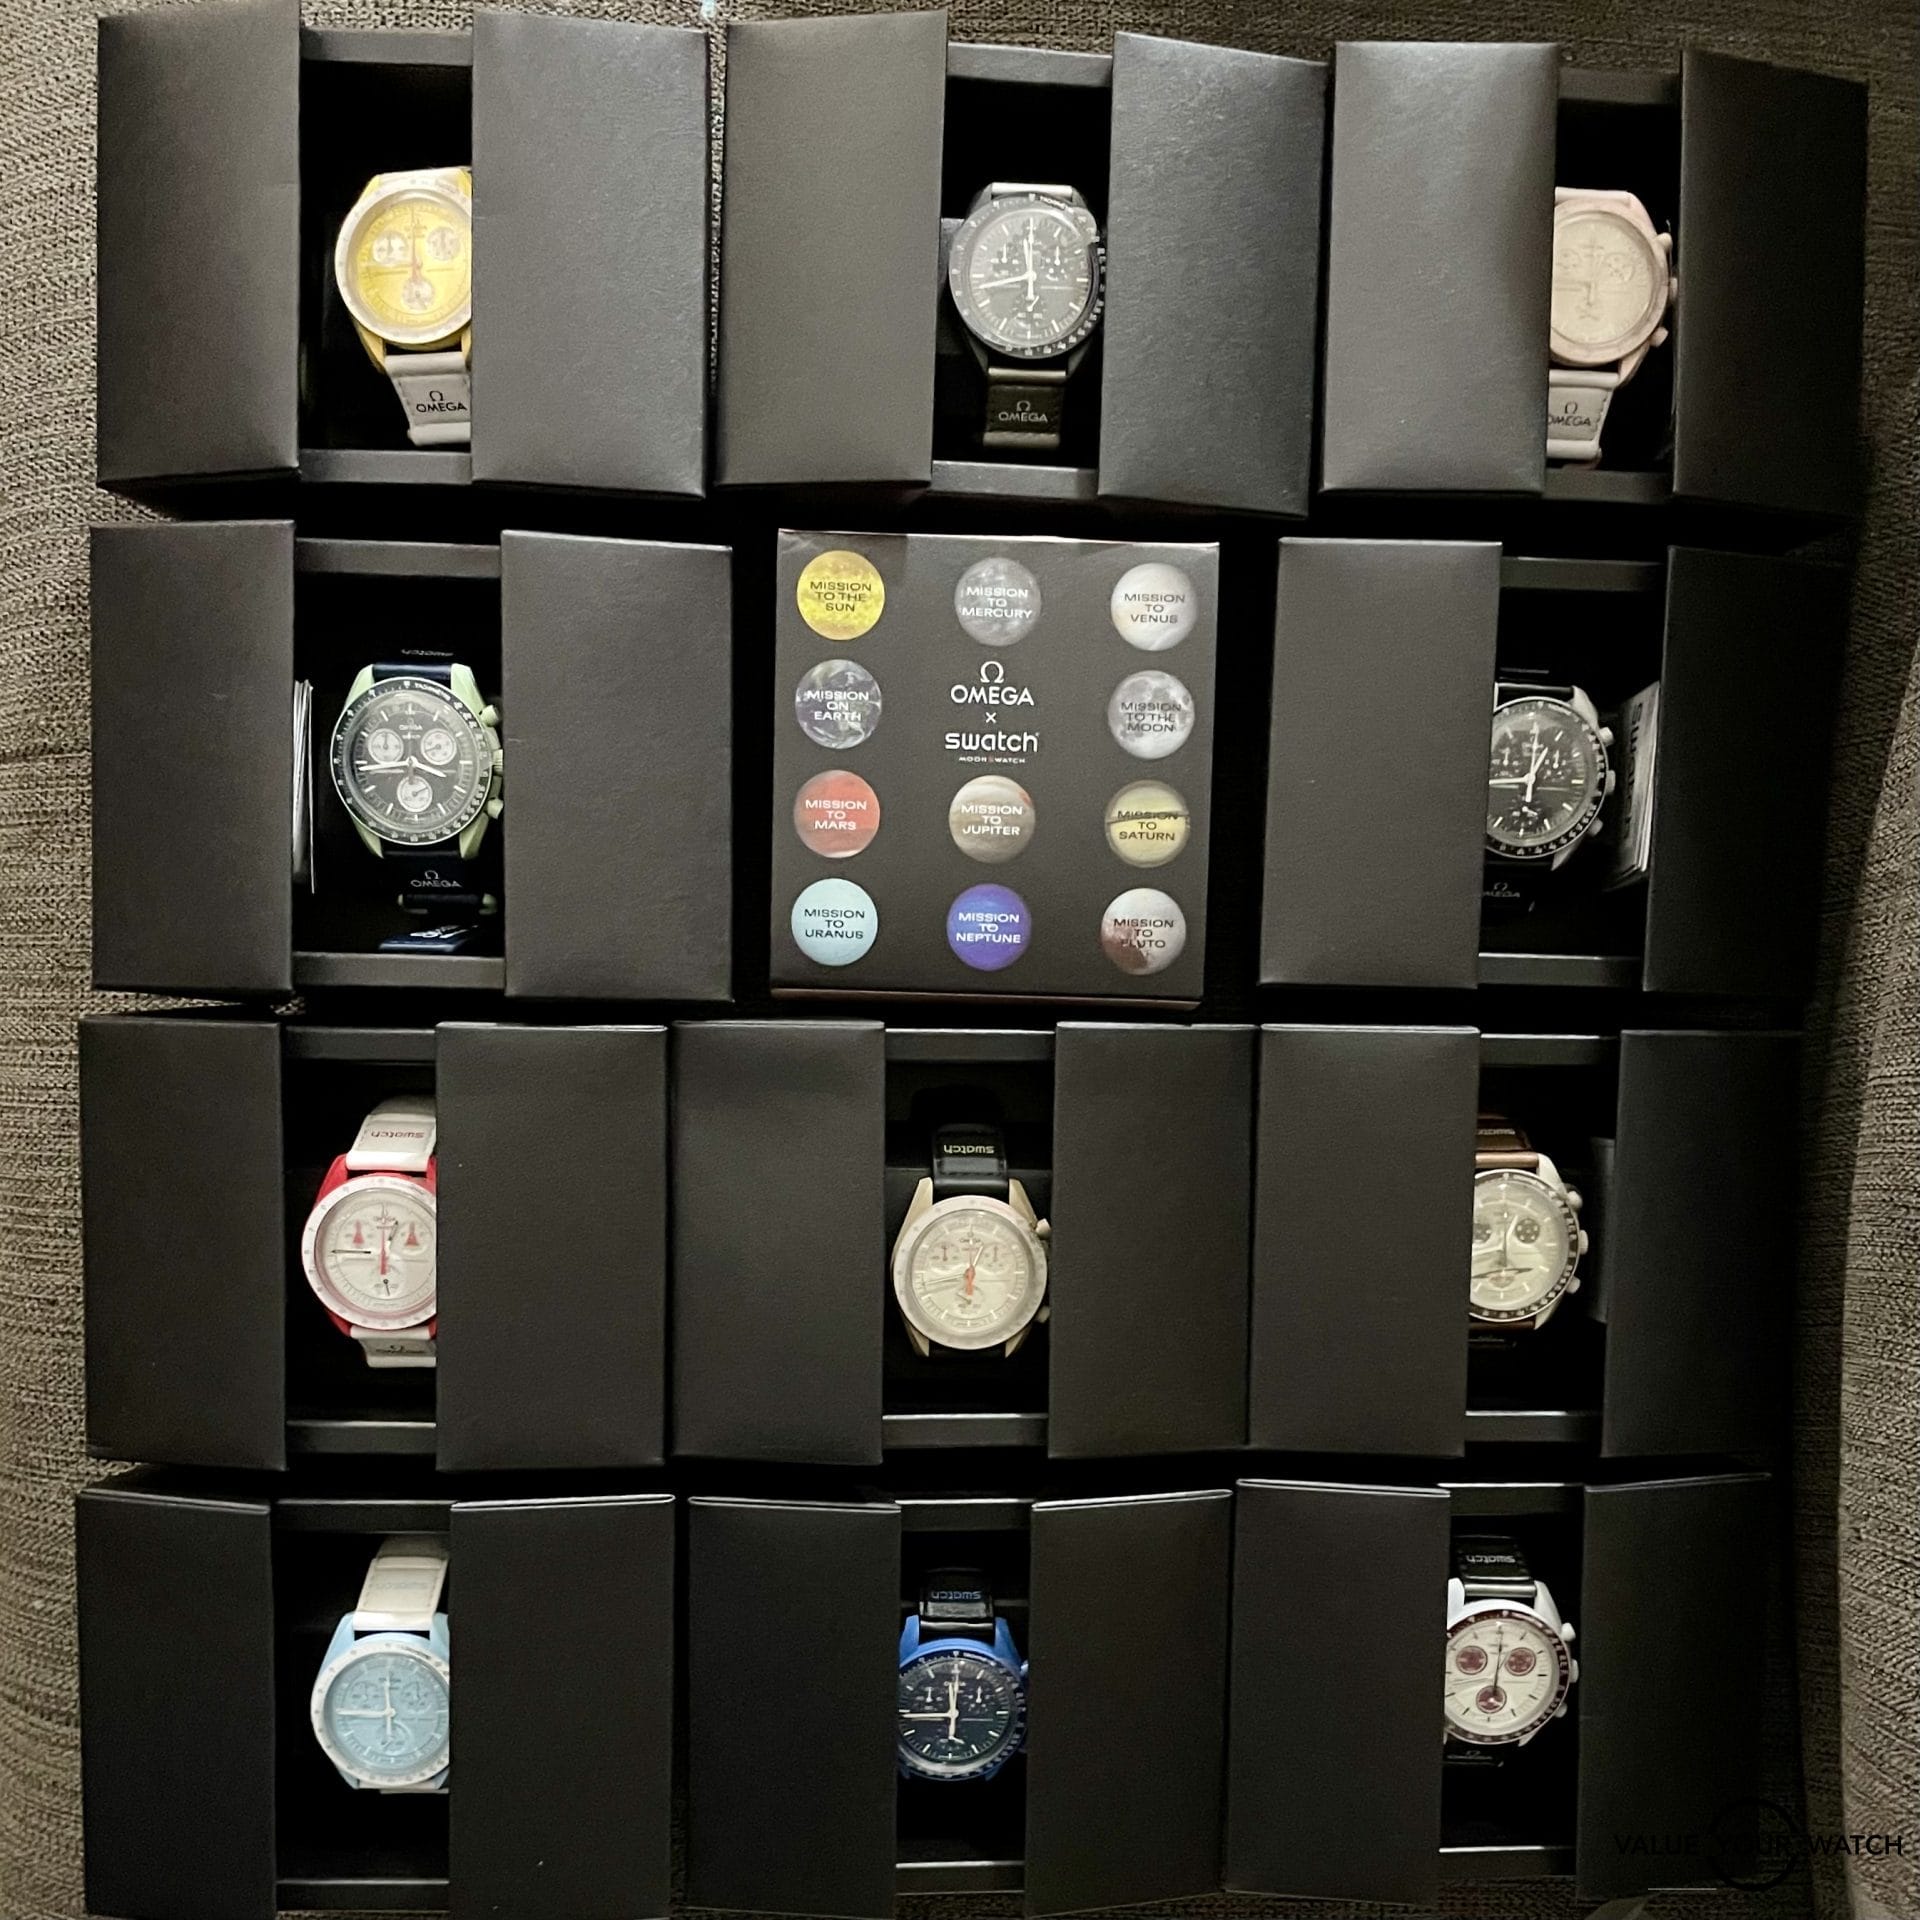 Omega X Swatch MoonSwatch Bioceramic Watch collection (all 11